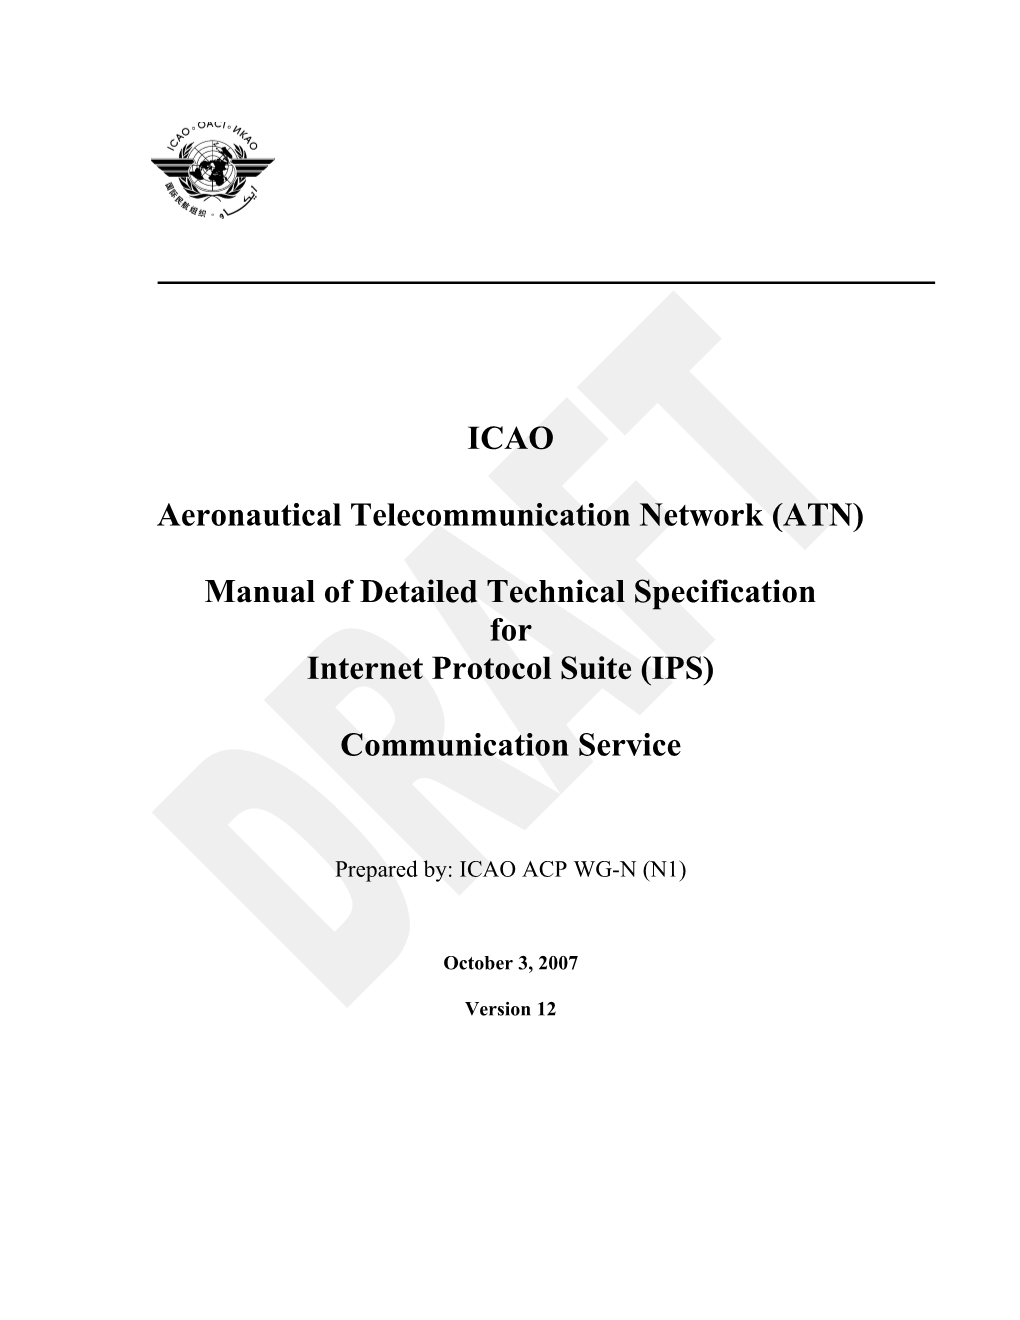 ICAO - Aeronautical Telecommunication Network (ATN)Manual of Detailed Technical Specification